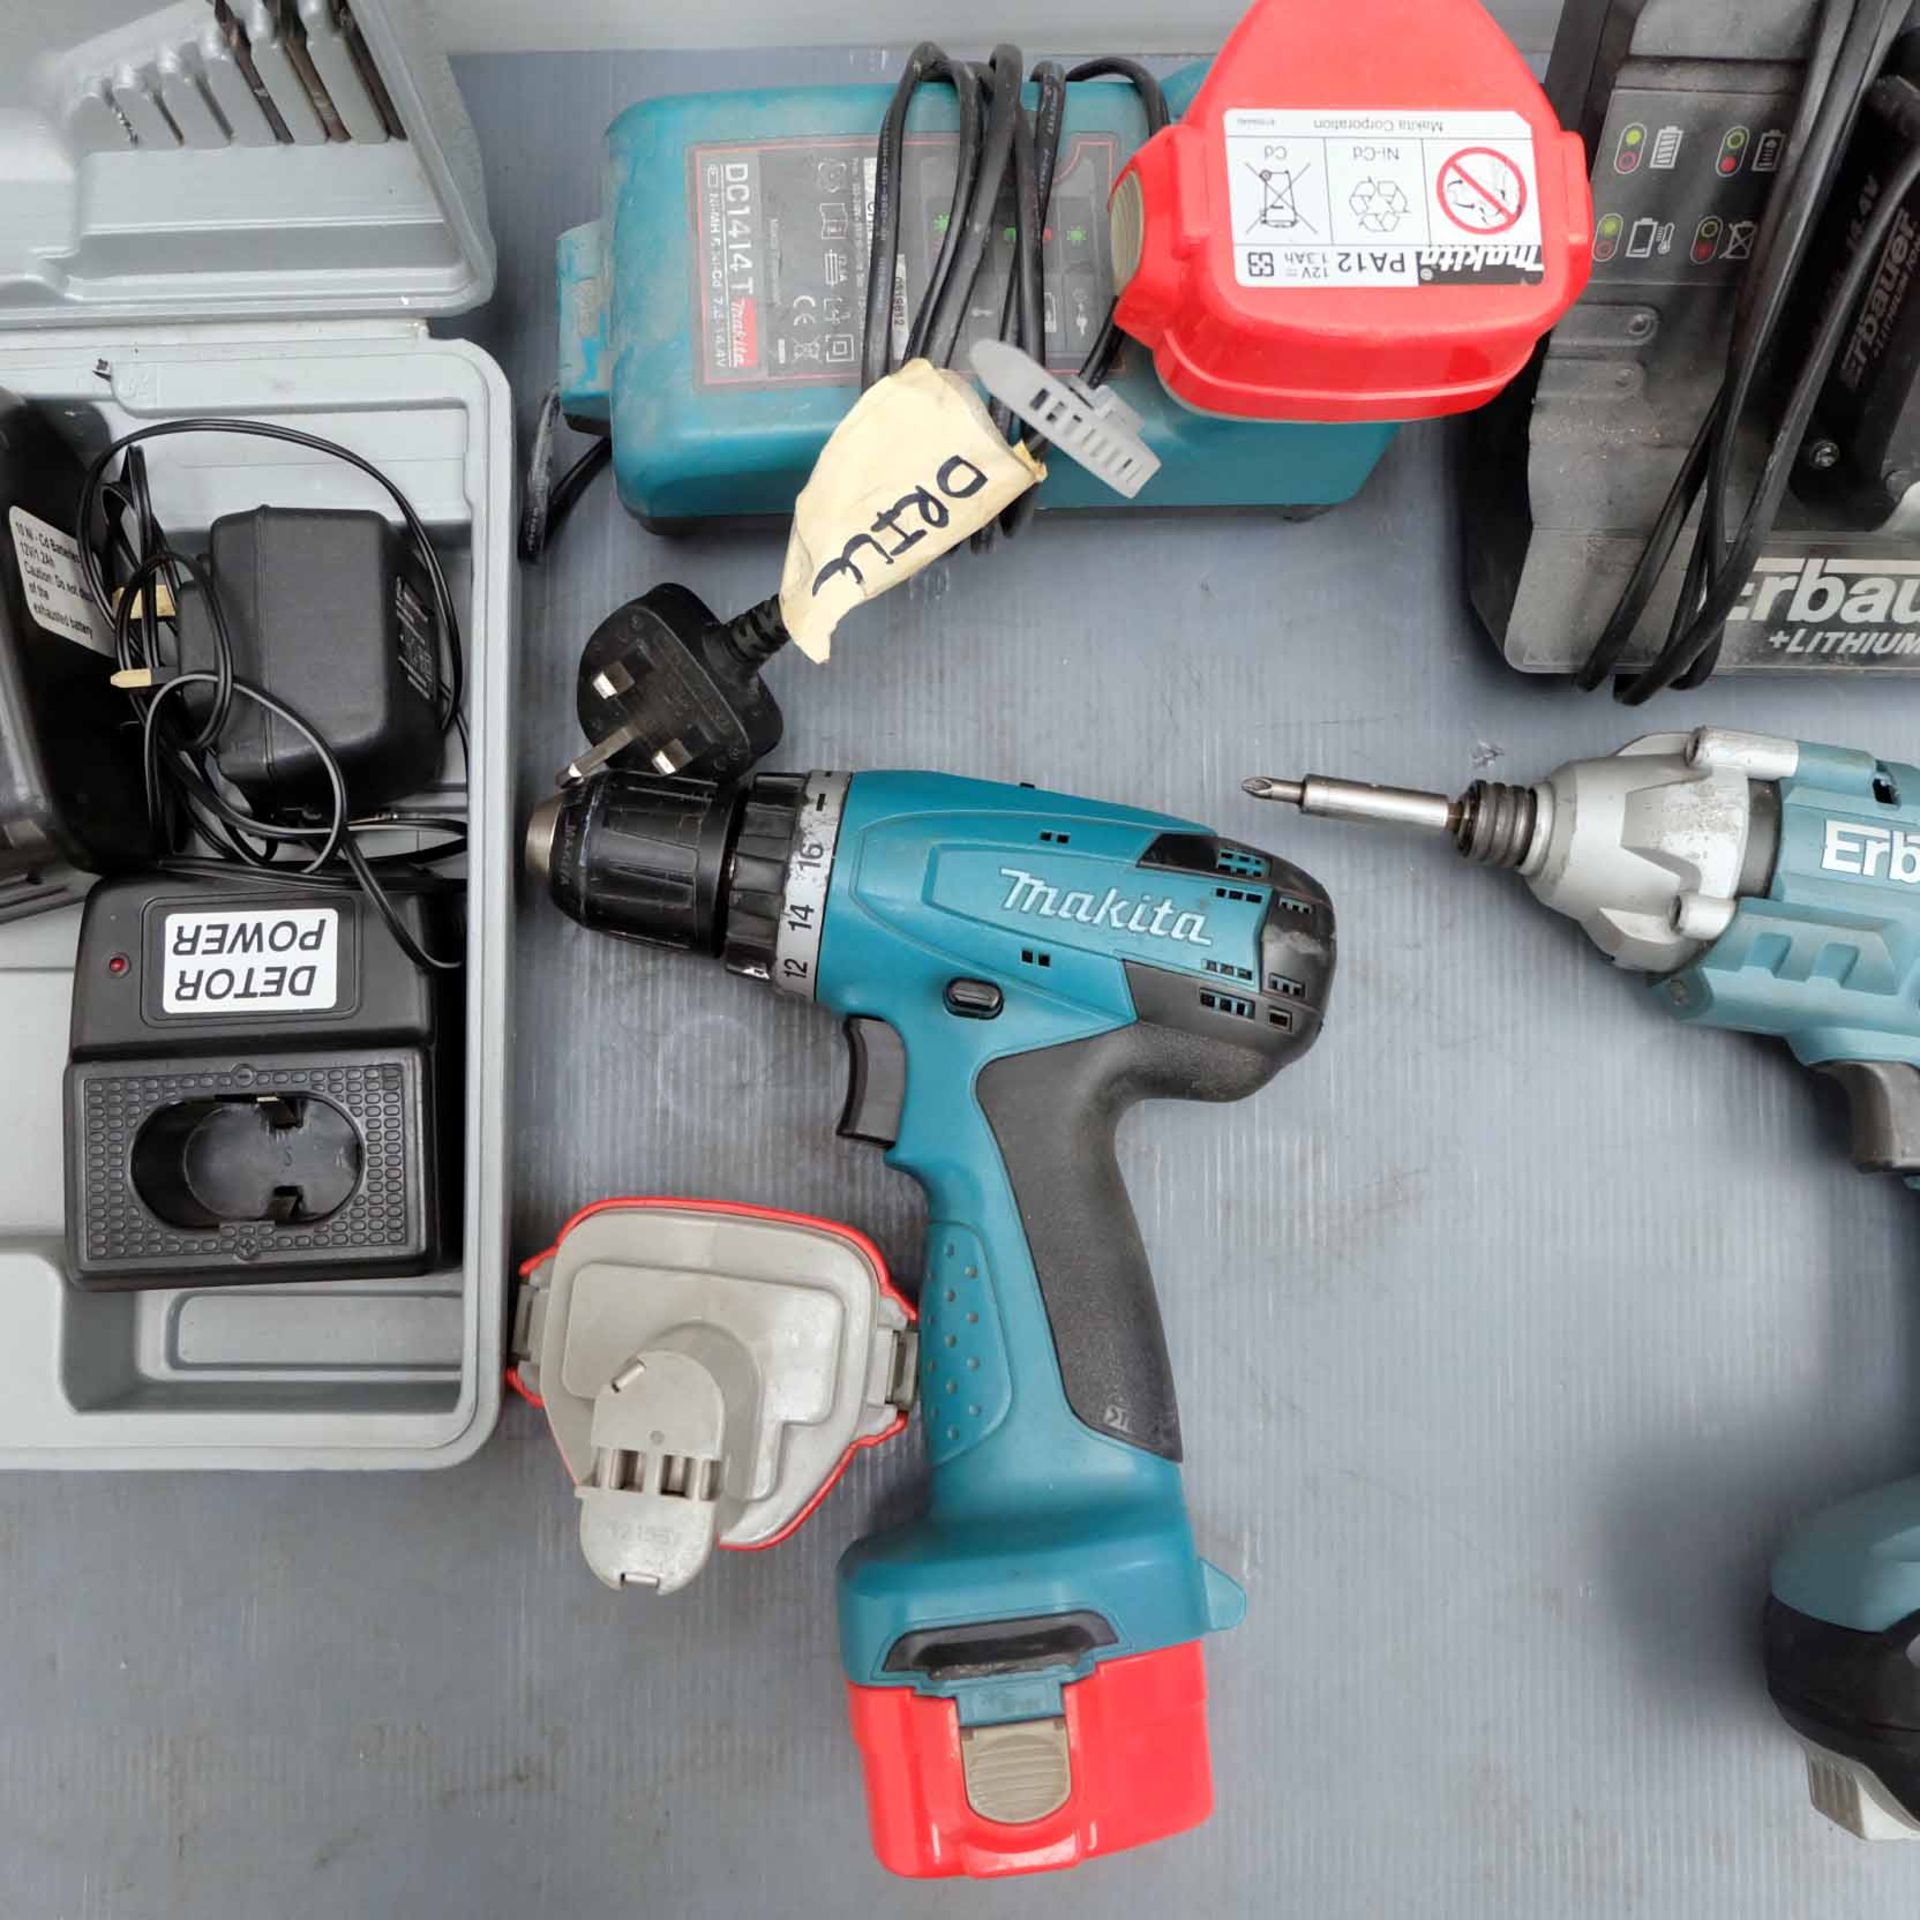 Quantity of 3 Drills. Includes Erbauer Drill With Charger & 2 Batteries (Working). Makita Drill With - Image 4 of 7